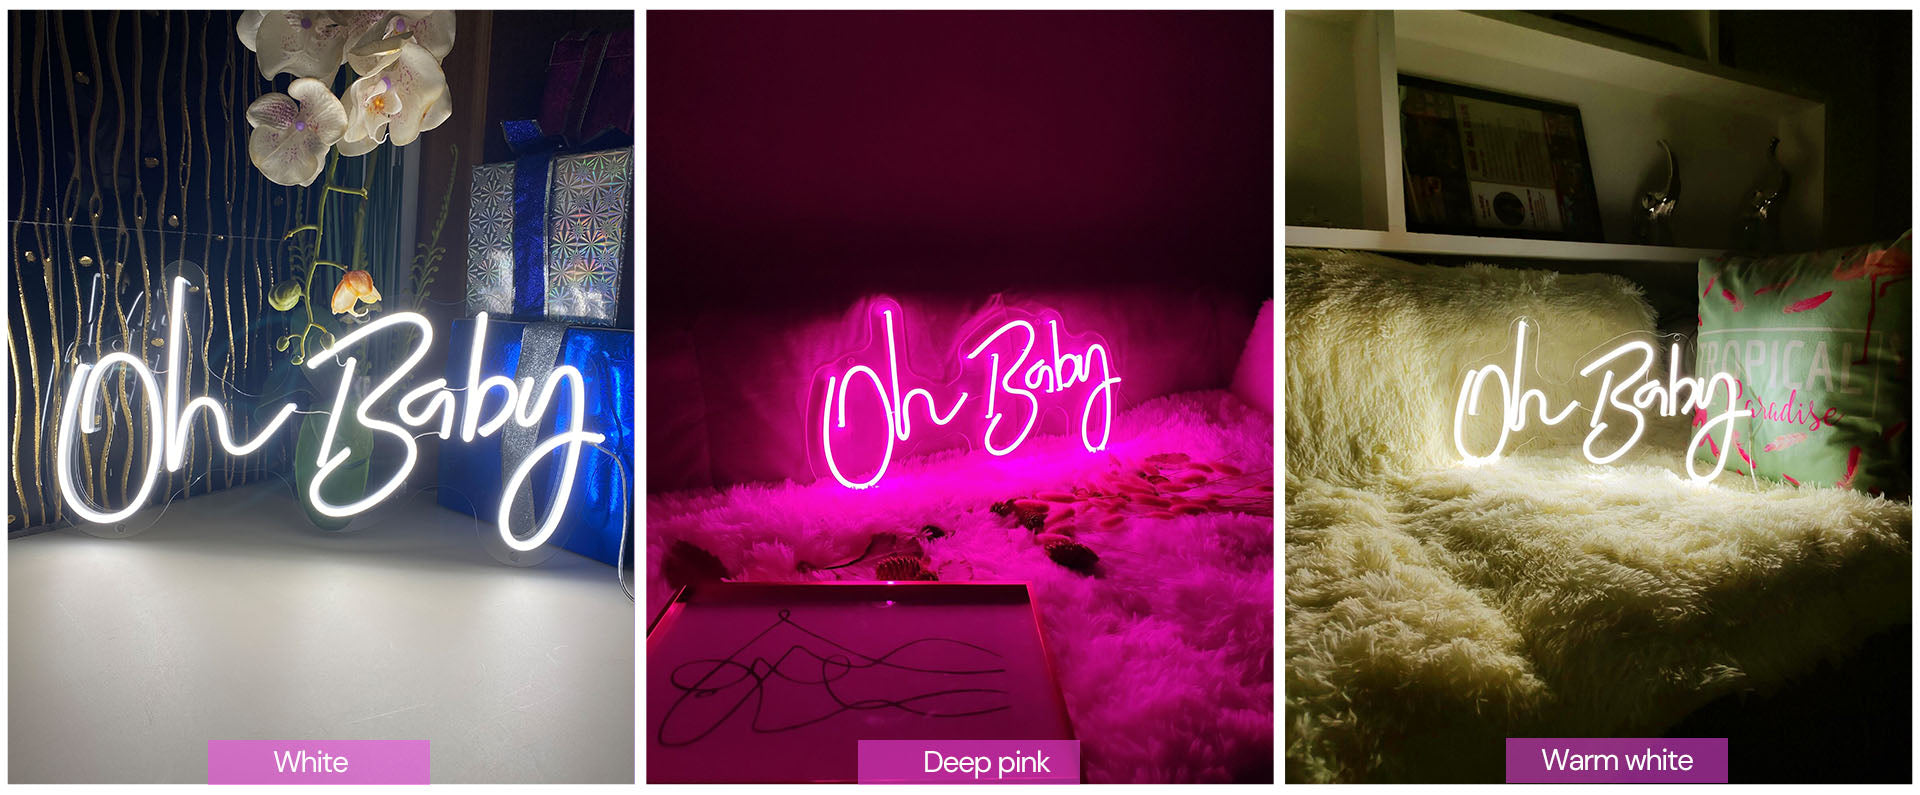 oh baby led neon light sign